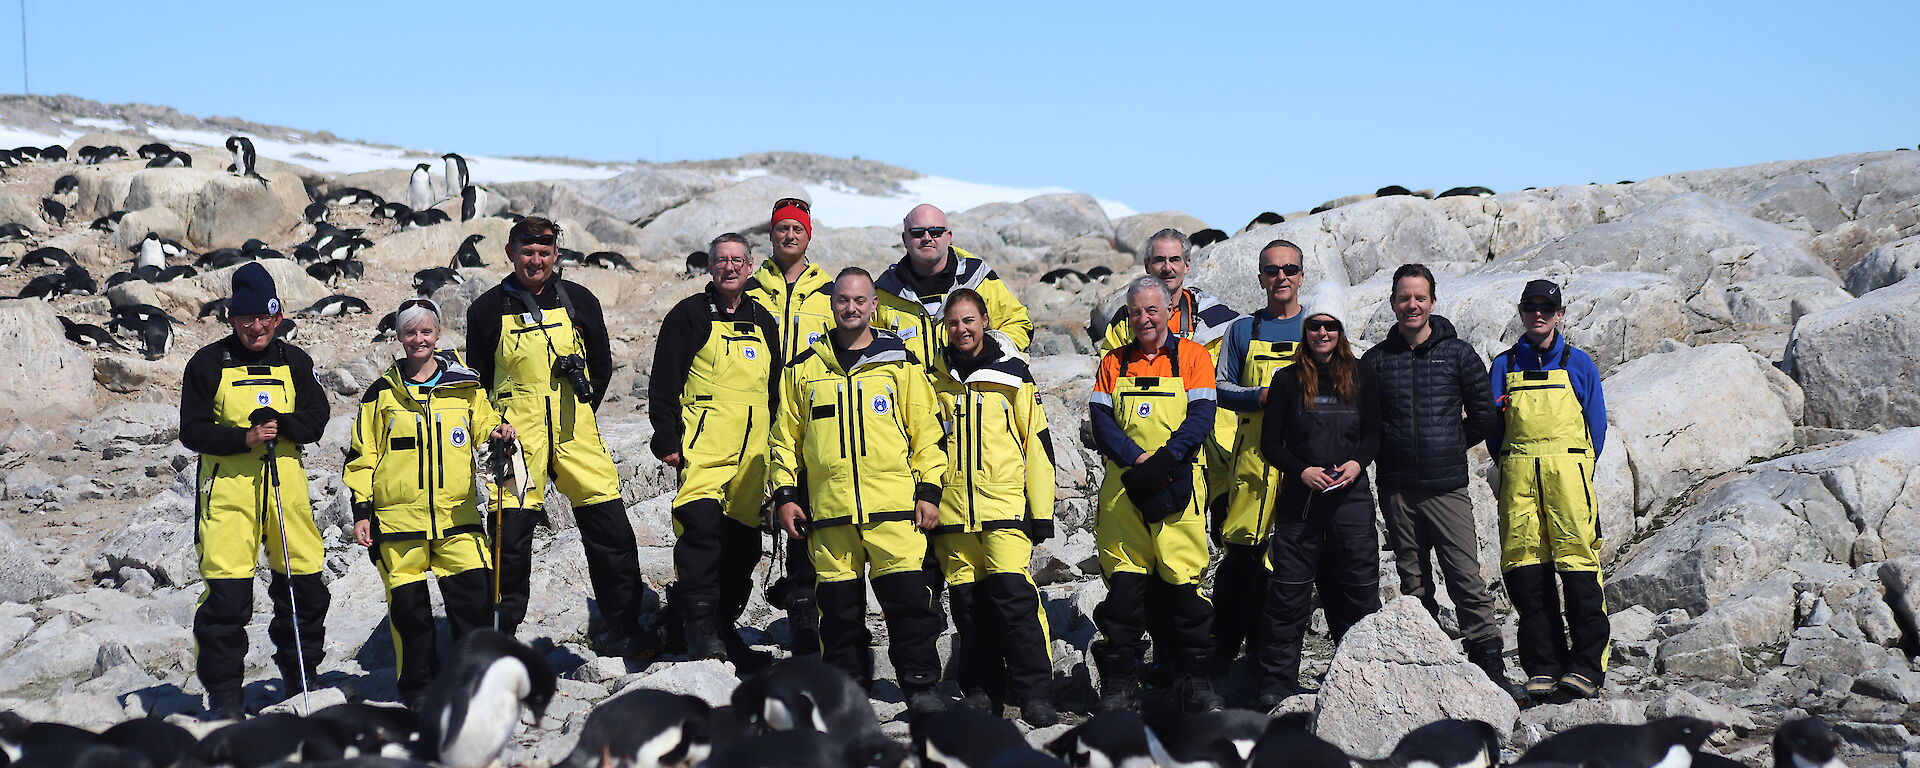 A group of expeditioners in Antarctic outfits (yellow and black) in a group, with penguins in rookery in foreground, rocky hill behind, blue sky in background.